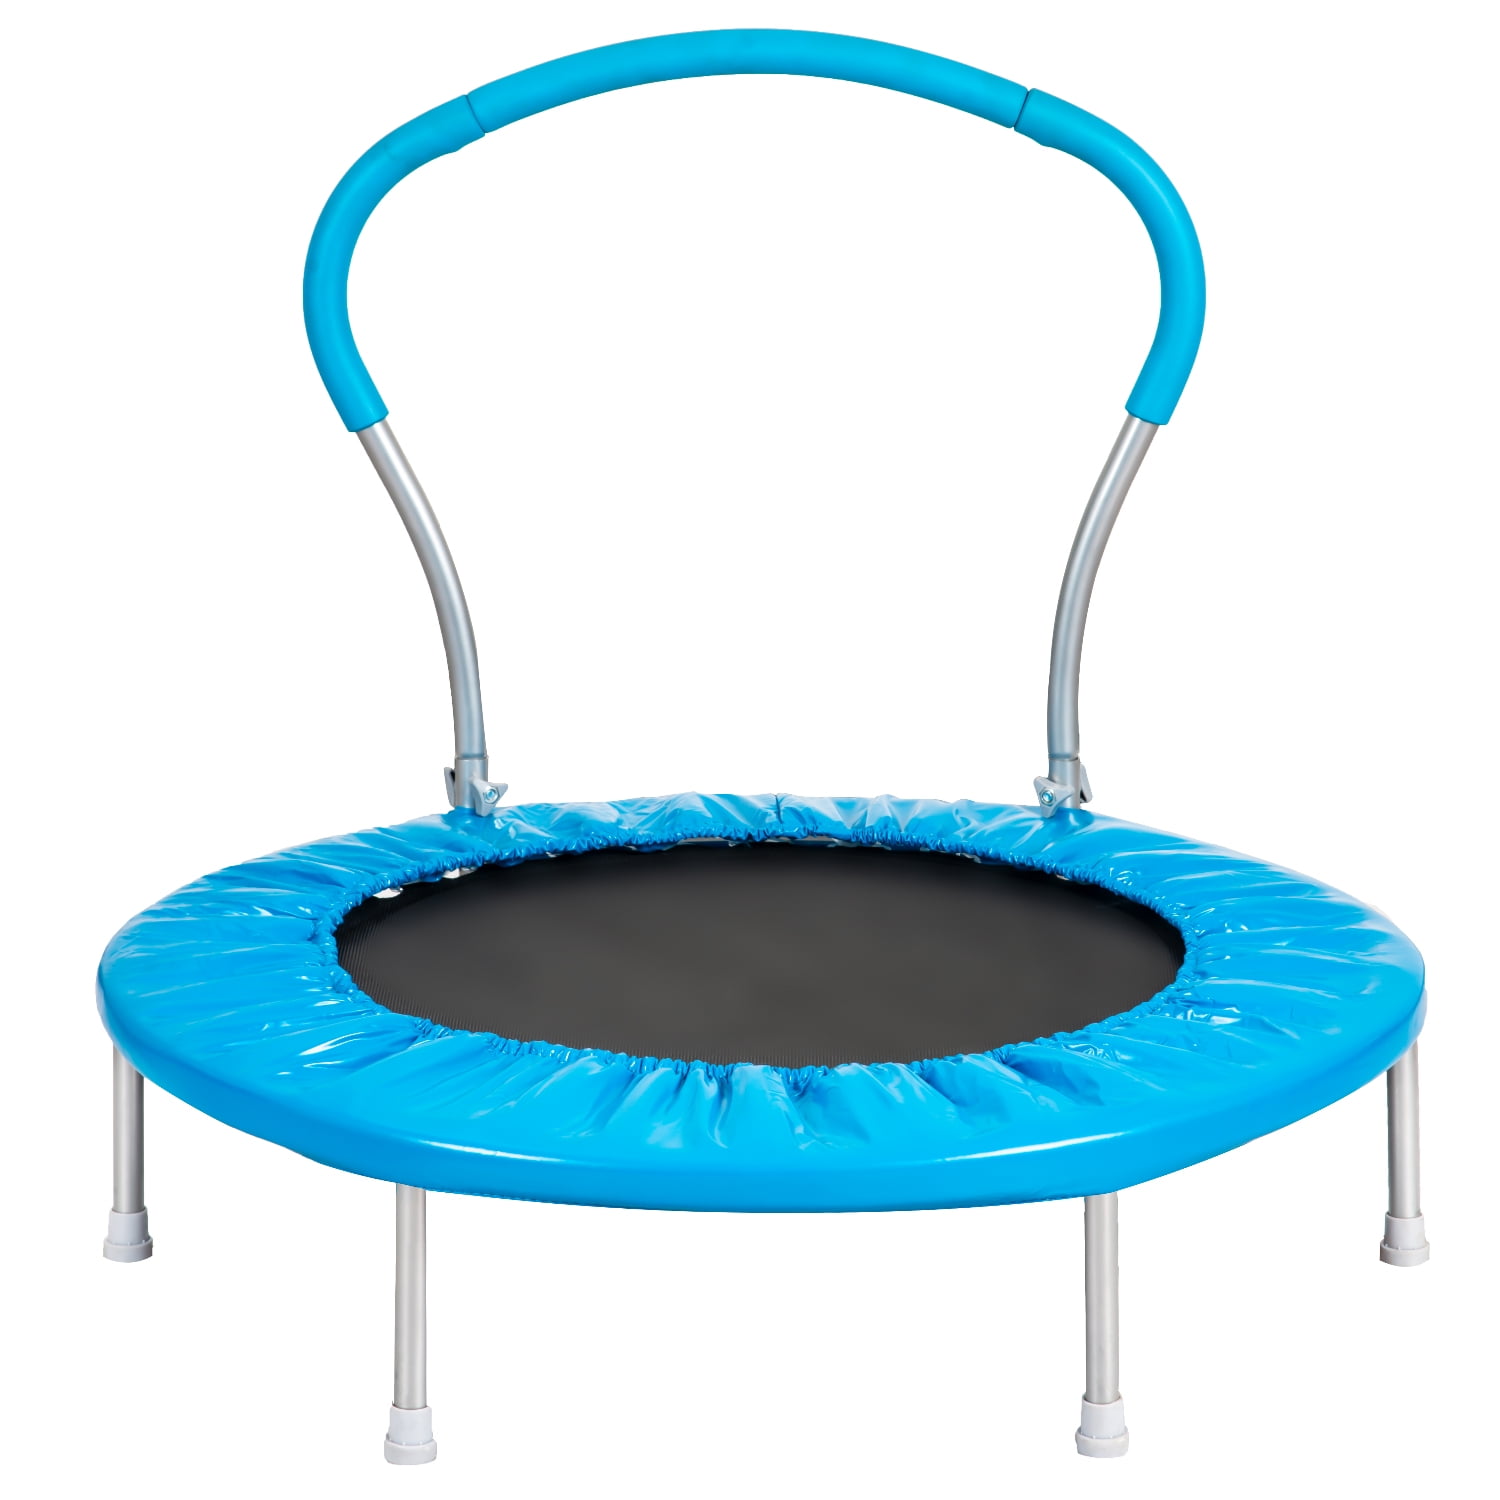 36&quot; Kids Indoor Trampoline, Small Toddler Trampoline for Boys Girls, Kids Trampoline Little Trampoline with Handrail and Safety Padded Cover, Mini Foldable Rebounder Fitness Trampoline, Blue, Q14379